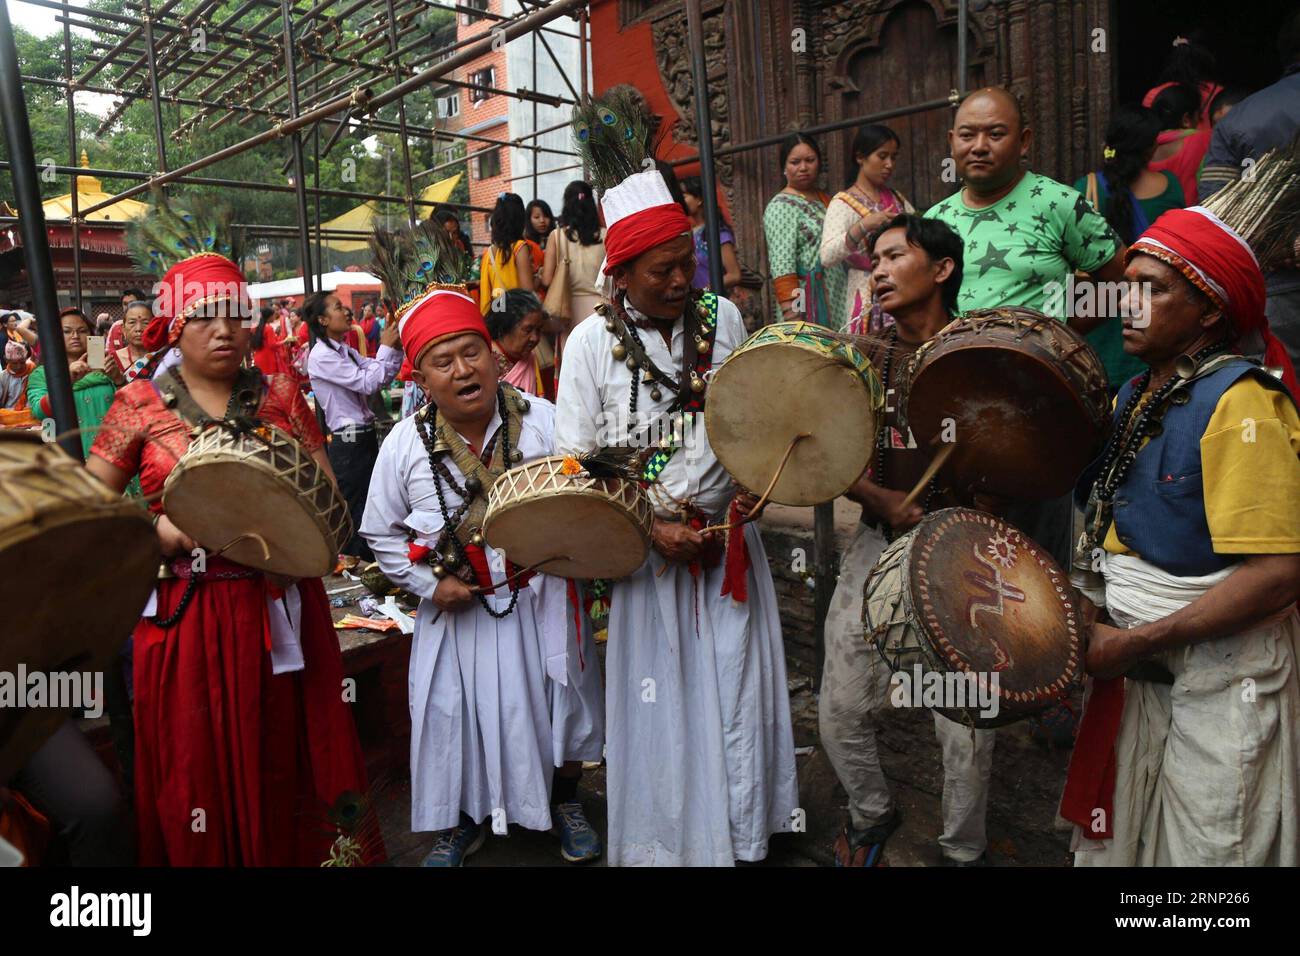 (170807) -- LALITPUR, Aug. 7, 2017 -- Witch doctors perform religious rituals during Purnima festival at Kumbheshwor temple in Lalitpur, Nepal, on Aug. 7, 2017. ) (srb) NEPAL-LALITPUR-PURNIMA FESTIVAL-KUMBHESHWOR TEMPLE sunilxsharma PUBLICATIONxNOTxINxCHN   Lalitpur Aug 7 2017 Witch Doctors perform Religious Ritual during PURNIMA Festival AT Kumbheshwor Temple in Lalitpur Nepal ON Aug 7 2017 SRB Nepal Lalitpur PURNIMA Festival Kumbheshwor Temple SunilxSharma PUBLICATIONxNOTxINxCHN Stock Photo